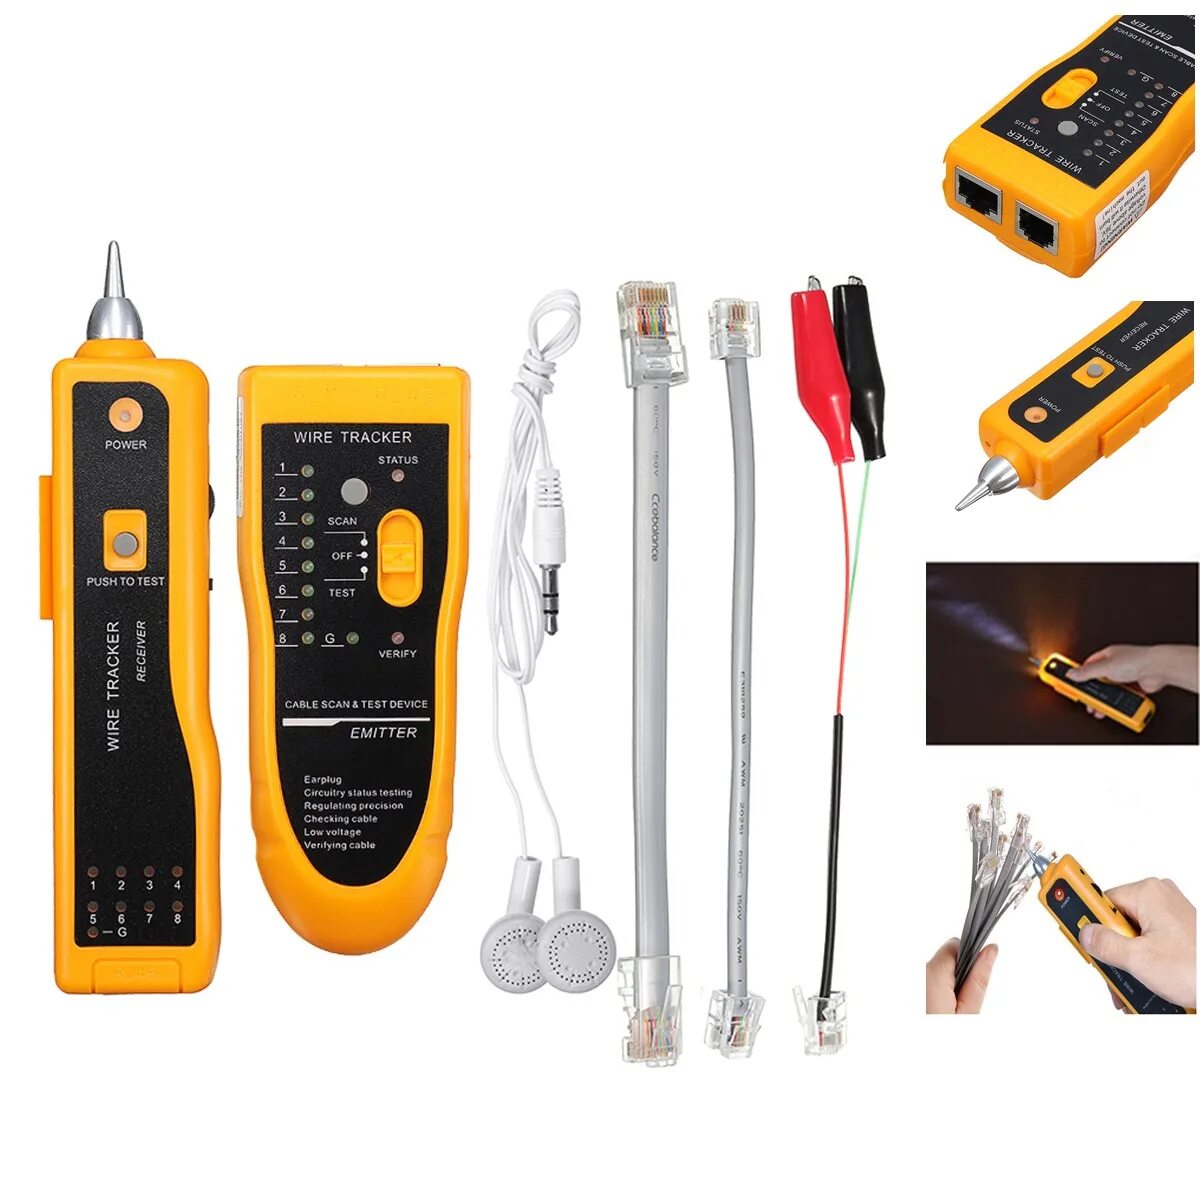 Power tracking. Кабельный тестер MJ-868. Type с Cable Tester. Receiver wire Tracker 255. Noftya Cable Tester 15000р.